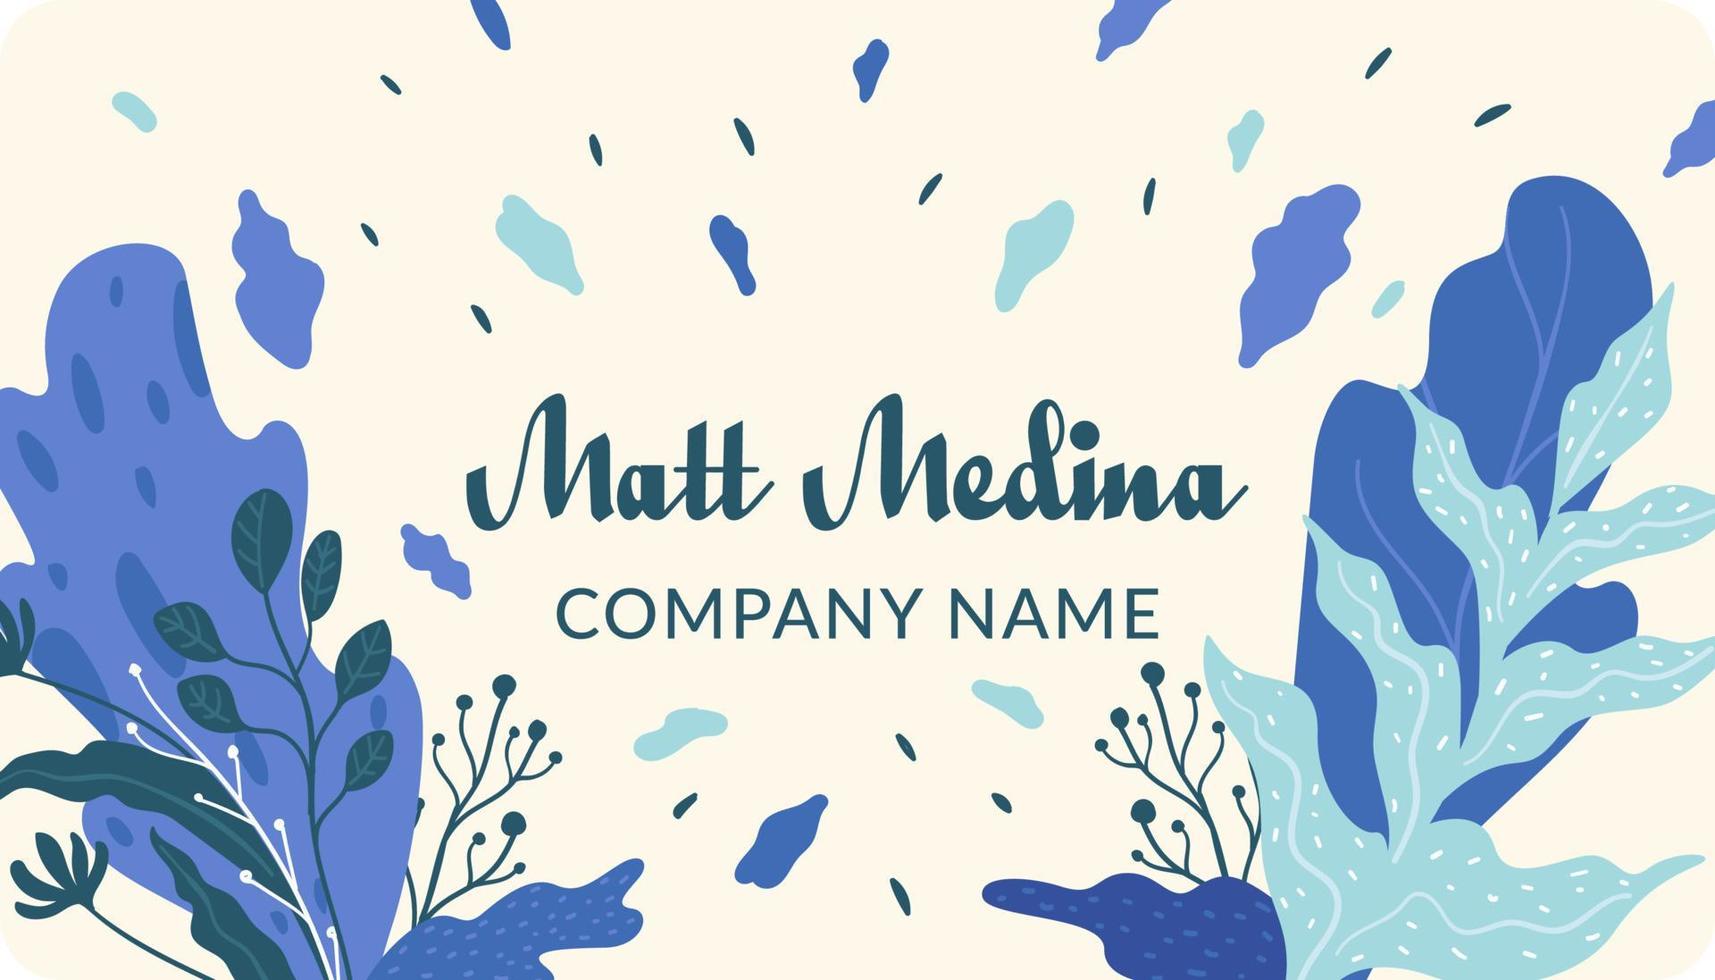 Company name on business card, foliage prints vector